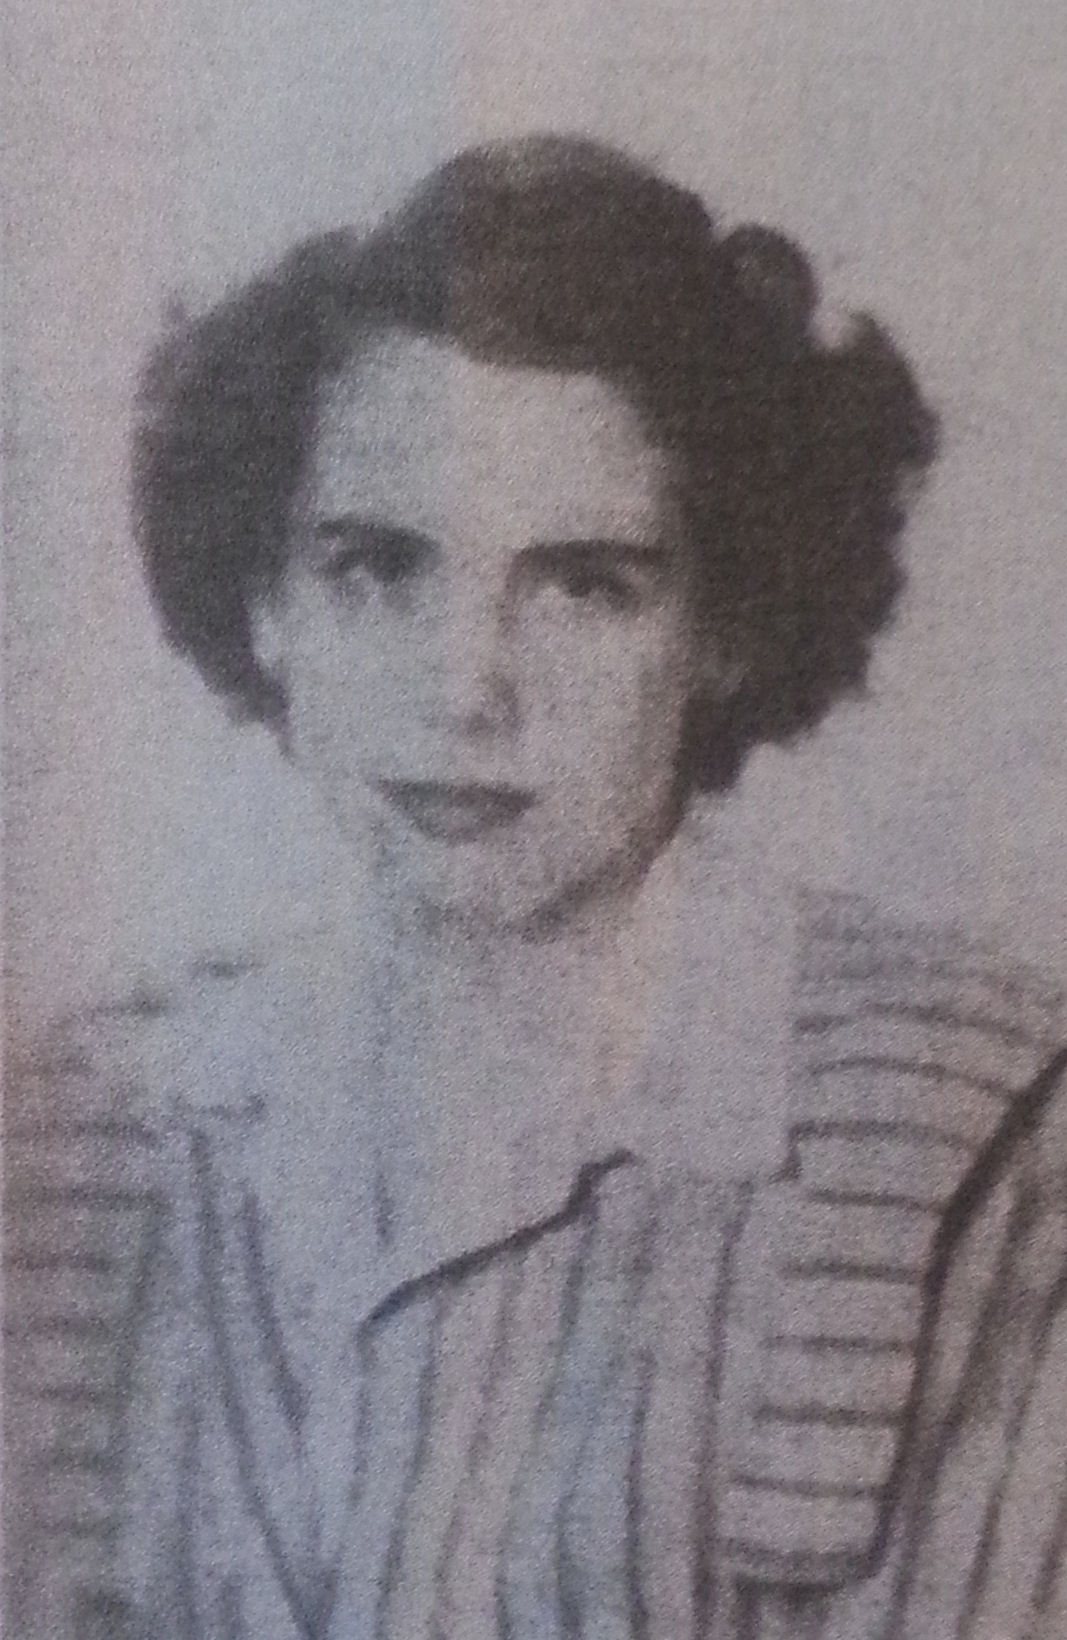 Picture of Daisy Evelyn Gore in Highschool 1949